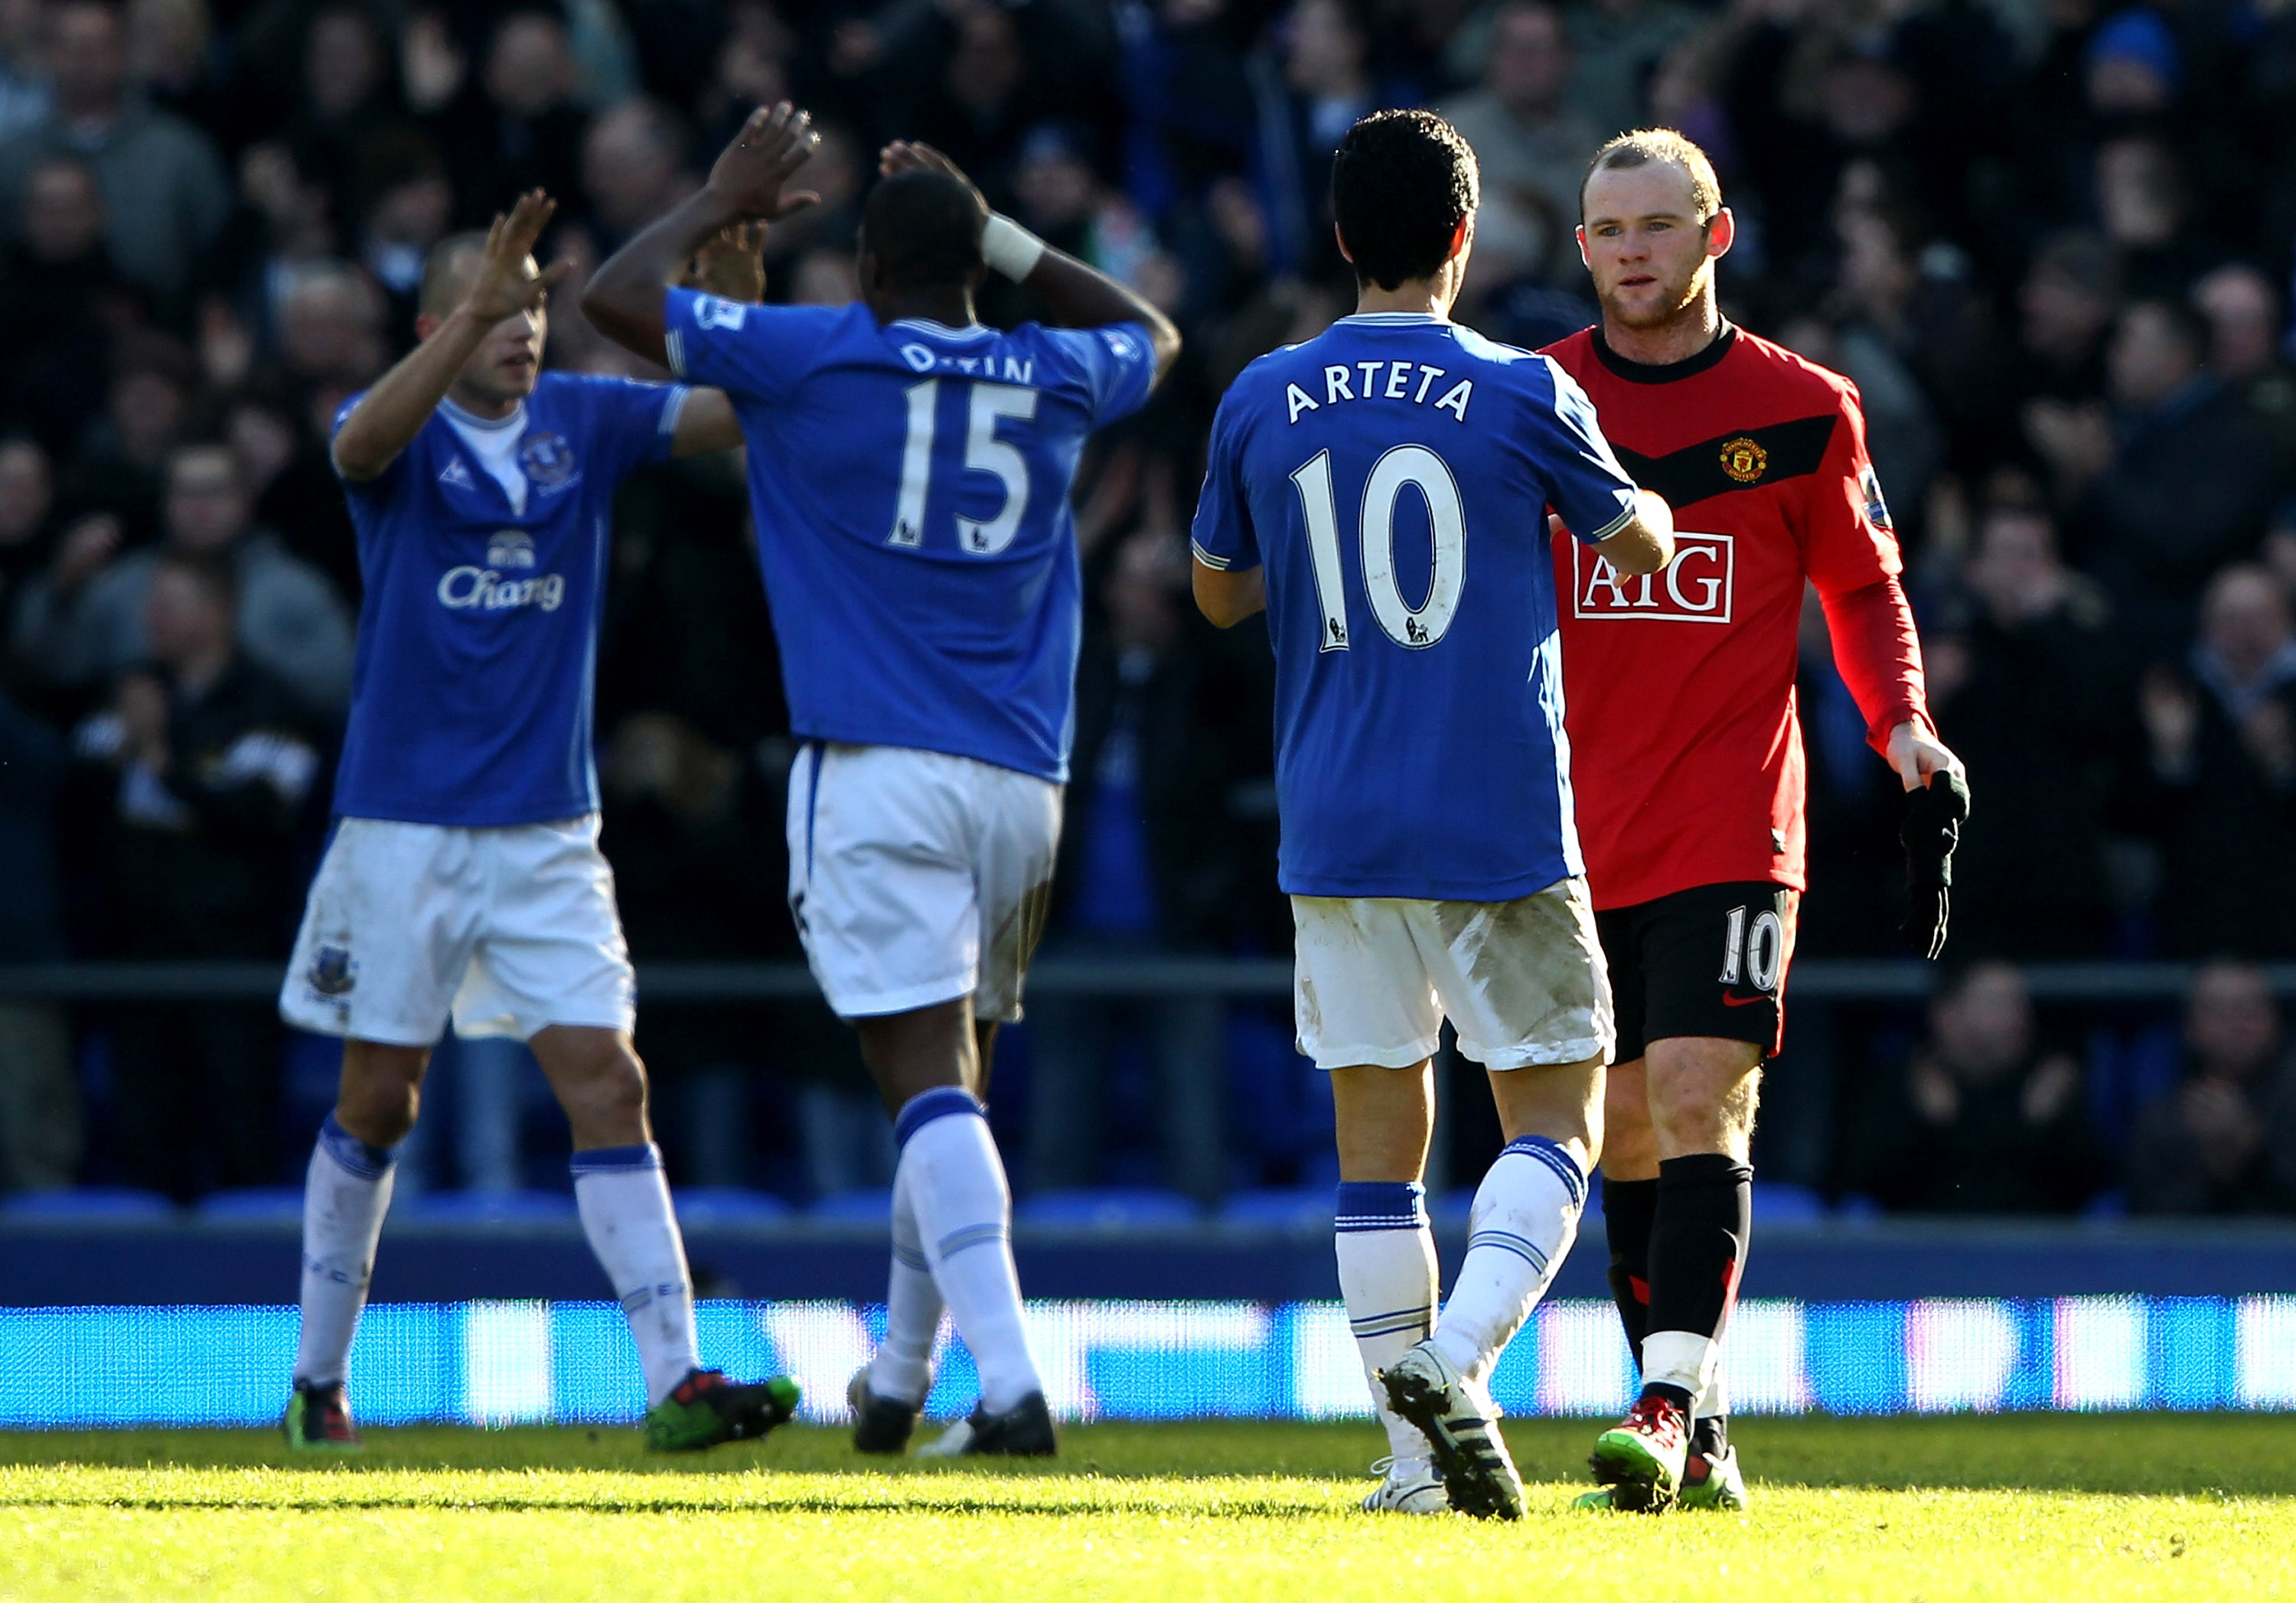 LIVERPOOL, ENGLAND - FEBRUARY 20:  Wayne Rooney (R) of Manchester United shakes hands with Mikel Arteta of Everton at the final whistle during the Barclays Premier League match between Everton and Manchester United at Goodison Park on February 20, 2010 in